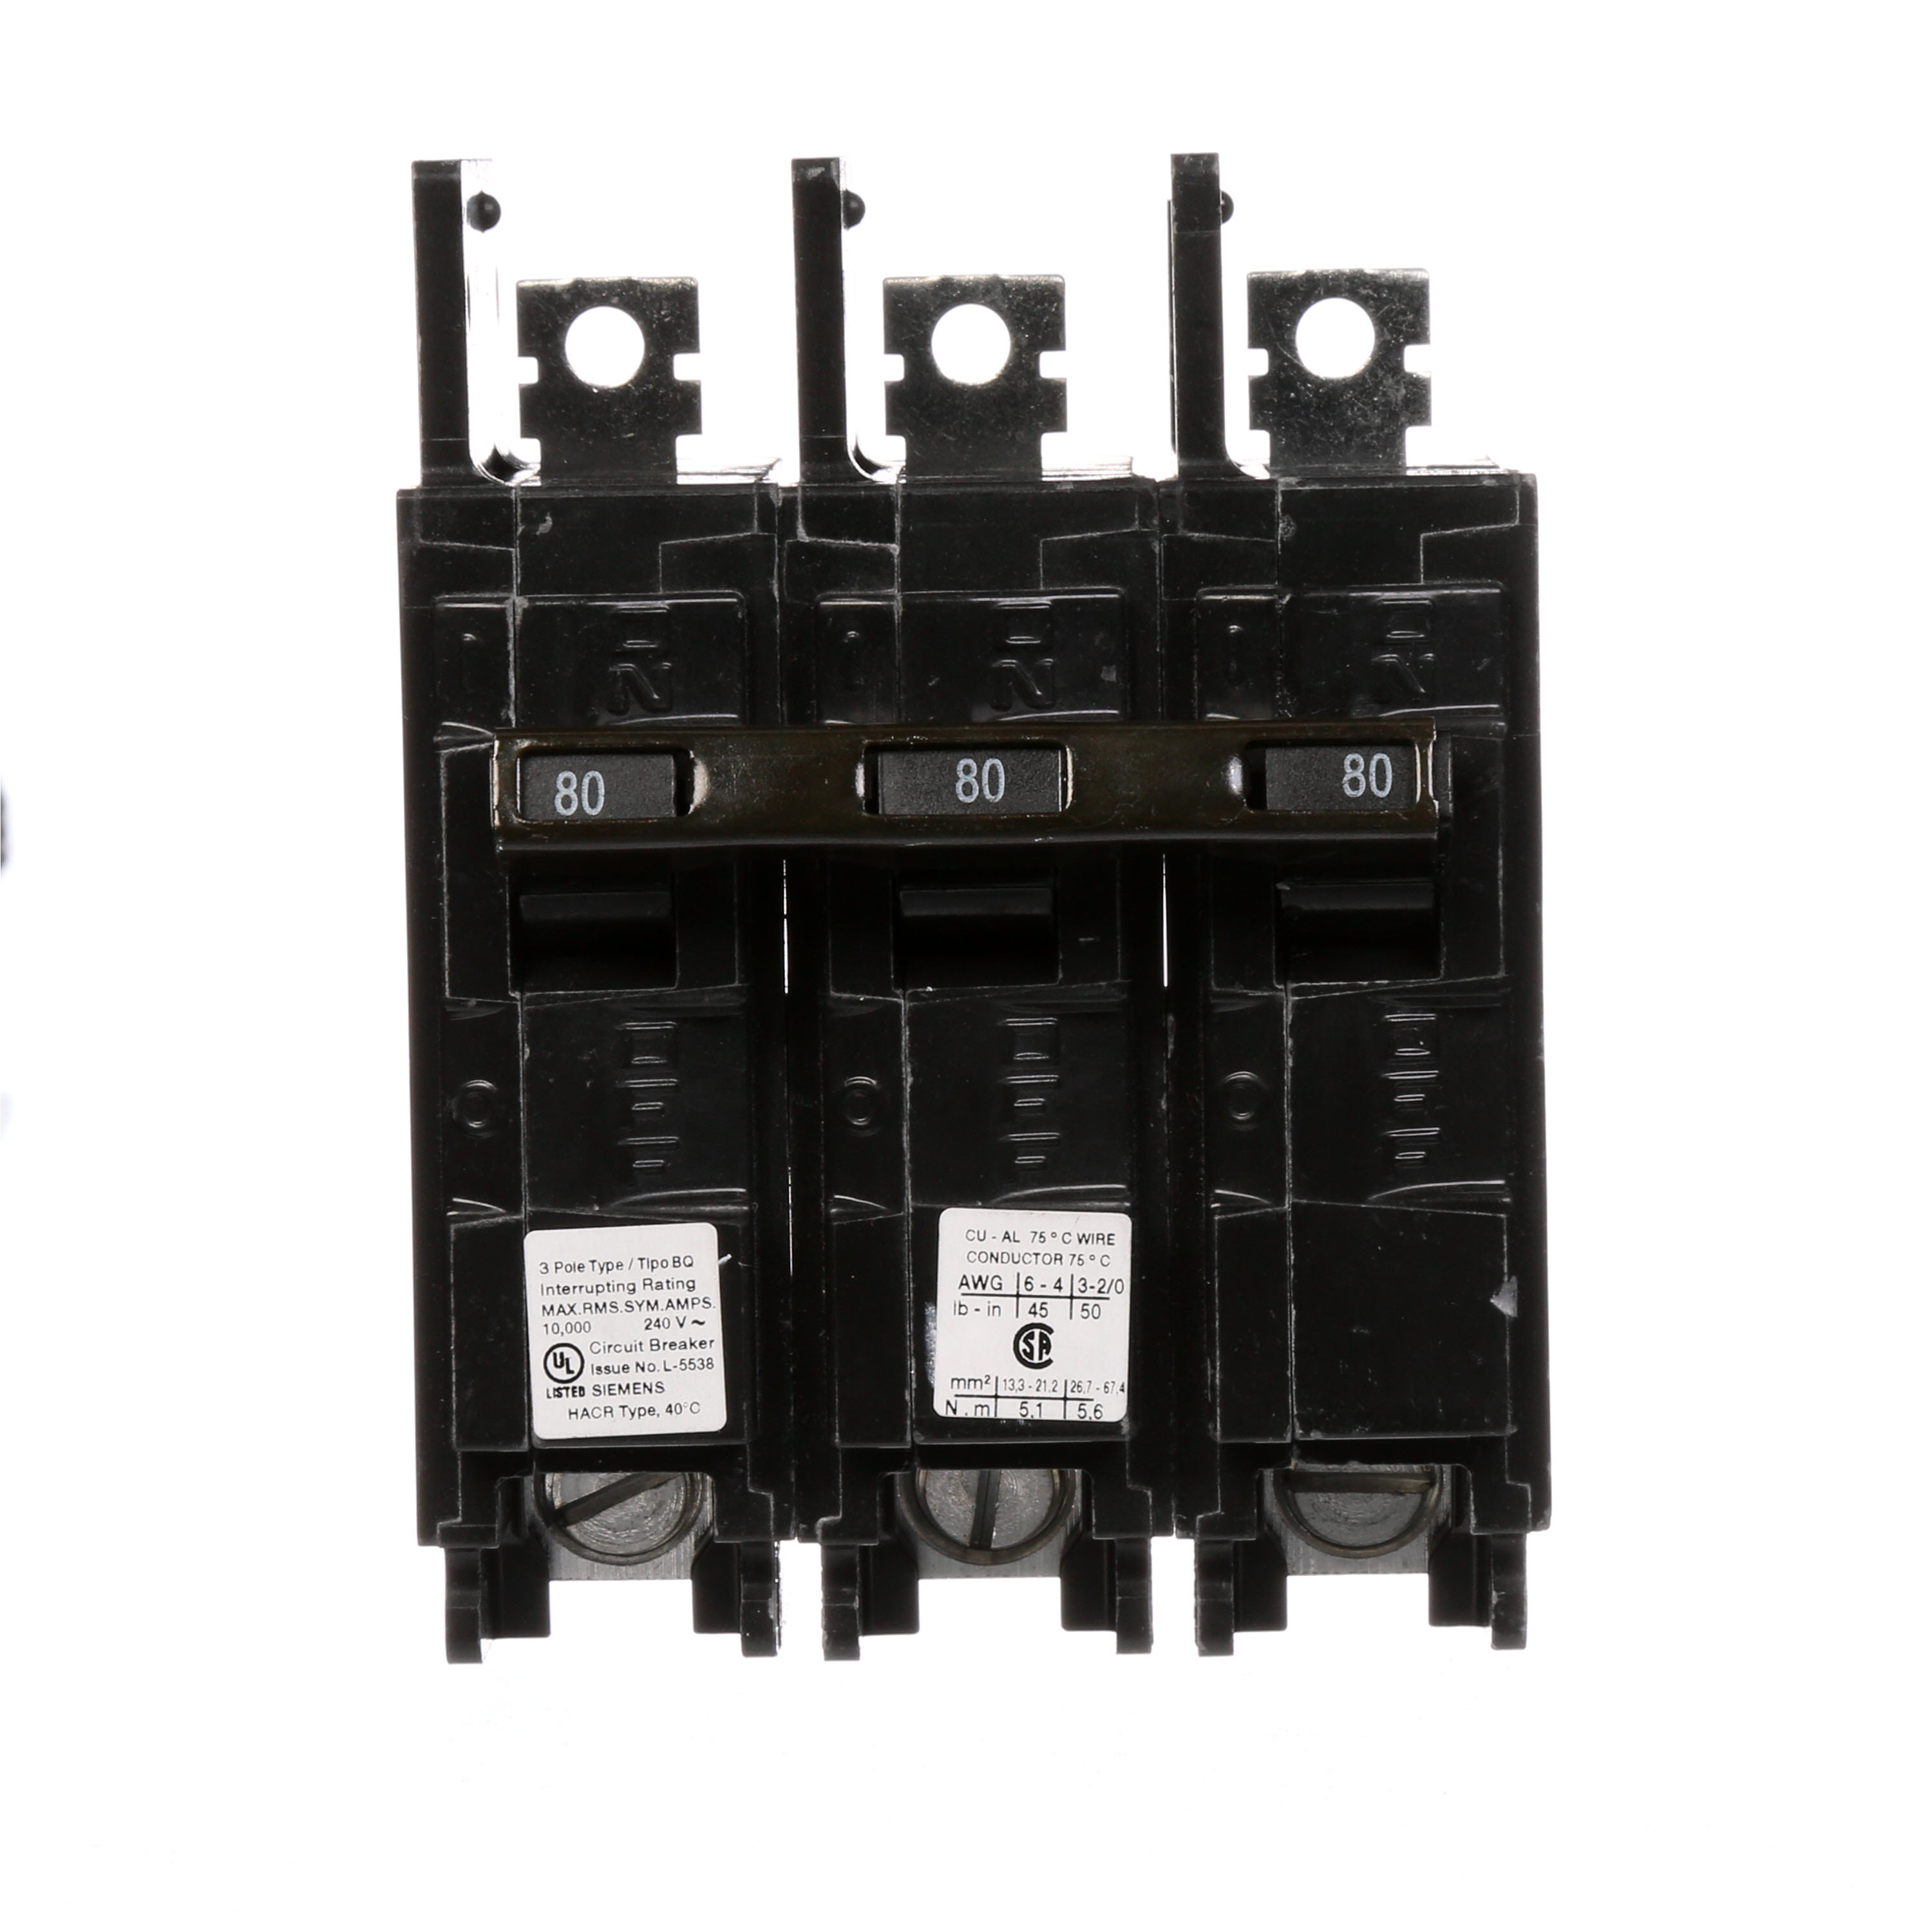 Siemens Low Voltage Molded Case Circuit Breakers General Purpose MCCBs are Circuit Protection Molded Case Circuit Breakers. 3-Pole Common-Trip circuit breaker type BQ. Rated 240V (080A) (AIR 10 kA). Special features Load side lugs are included.